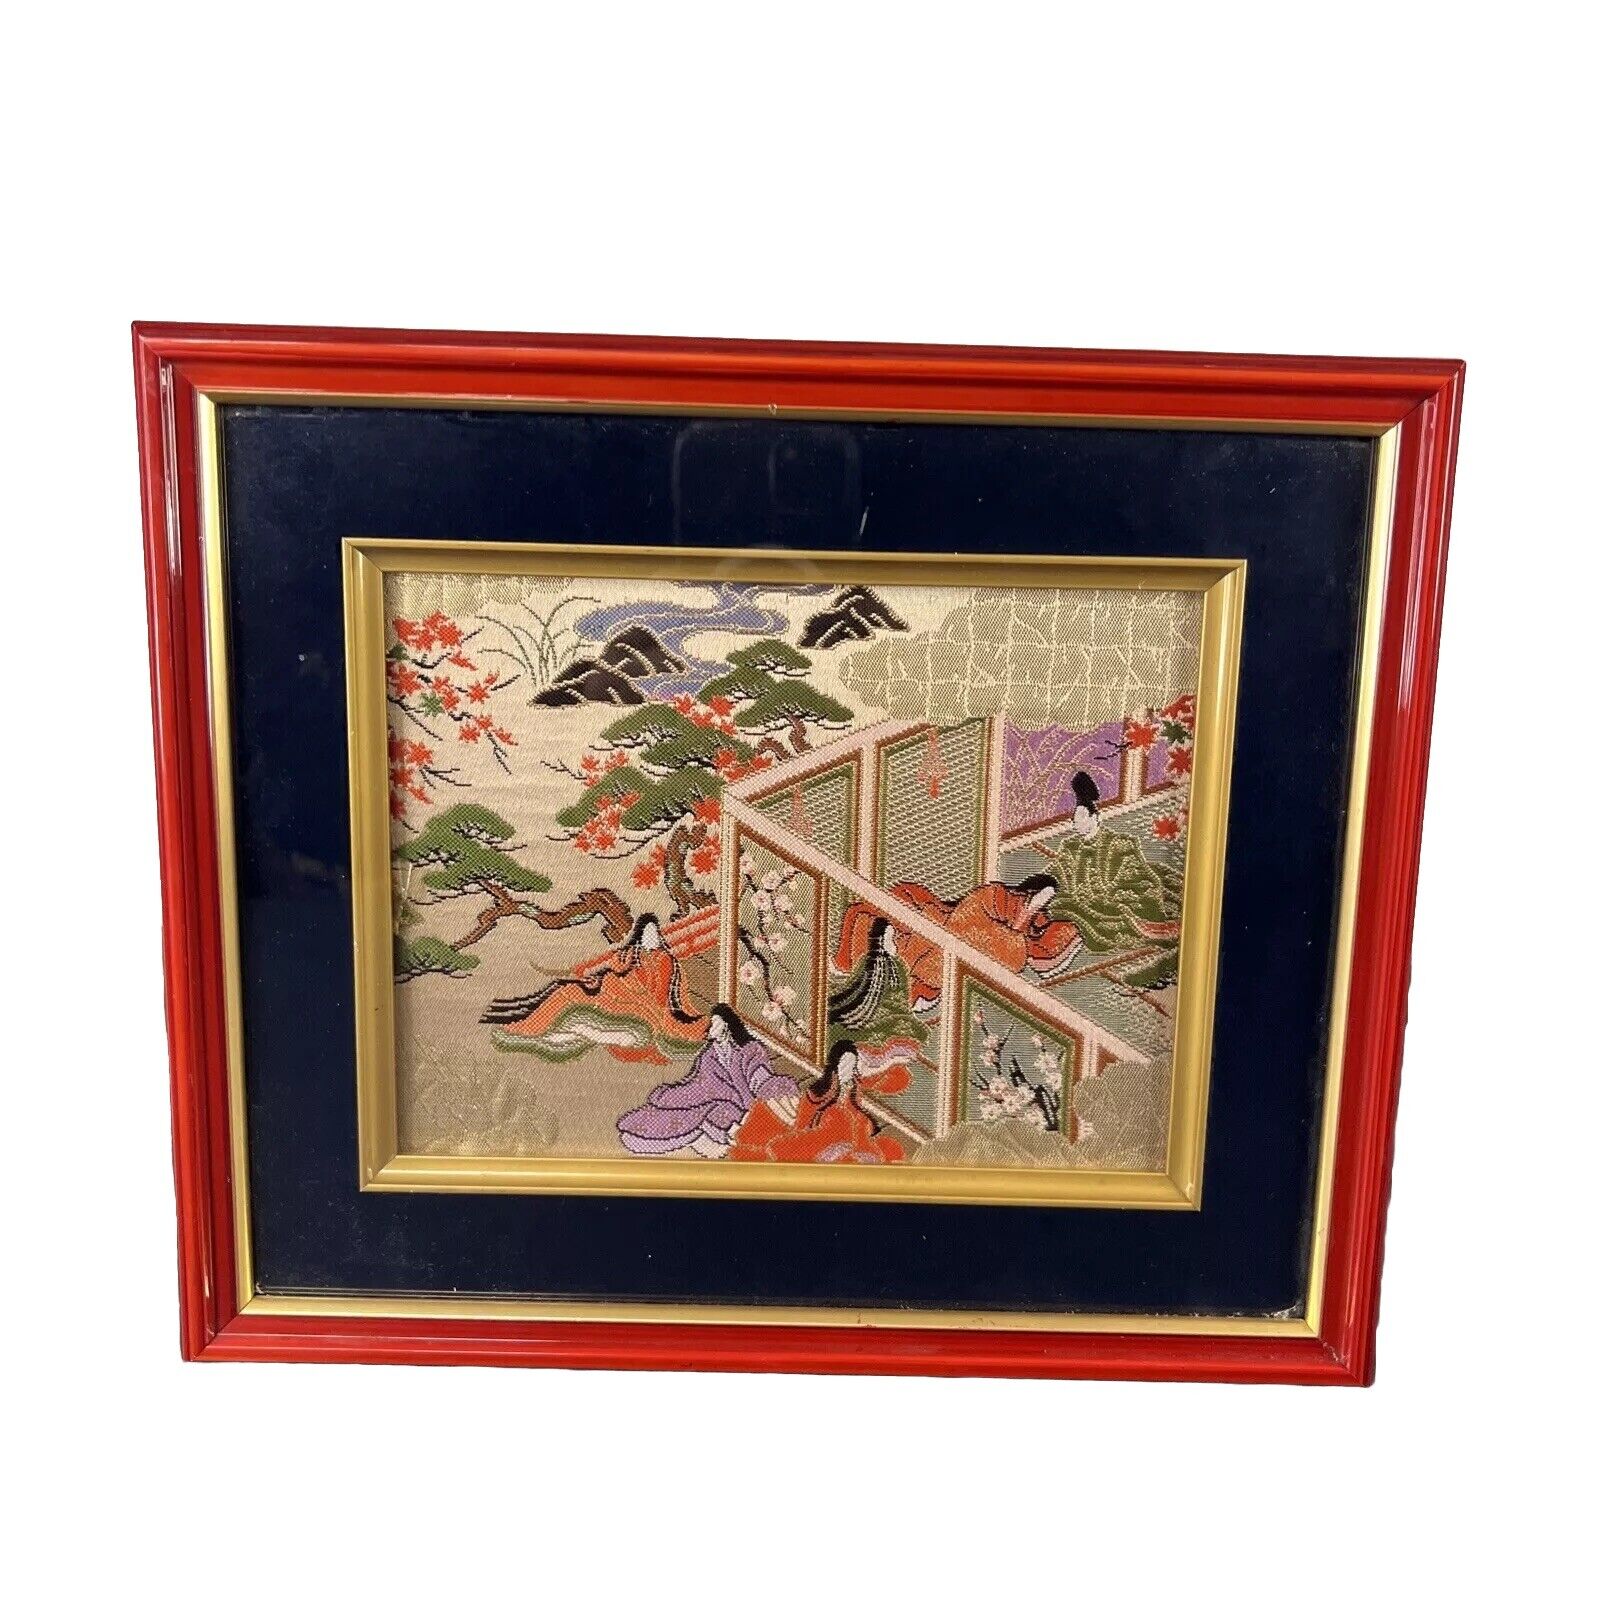 Small Japanese Wall Art Kyoto Nishijin Woven Stitch Red Frame Japan Home Deco